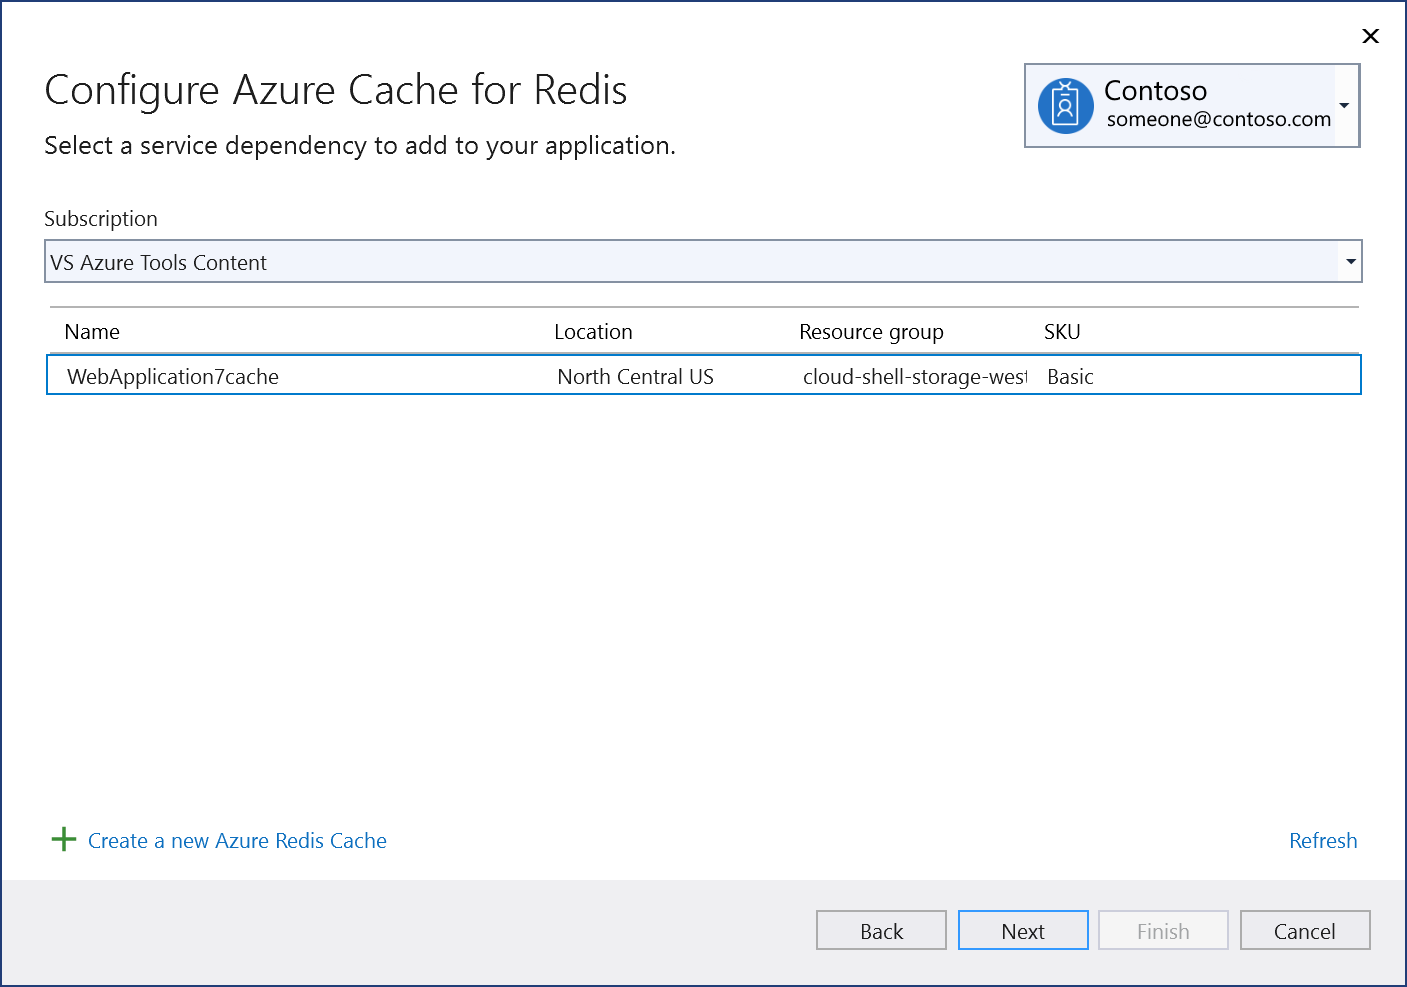 Screenshot of the Configure Azure Cache for Redis screen. Next is highlighted.